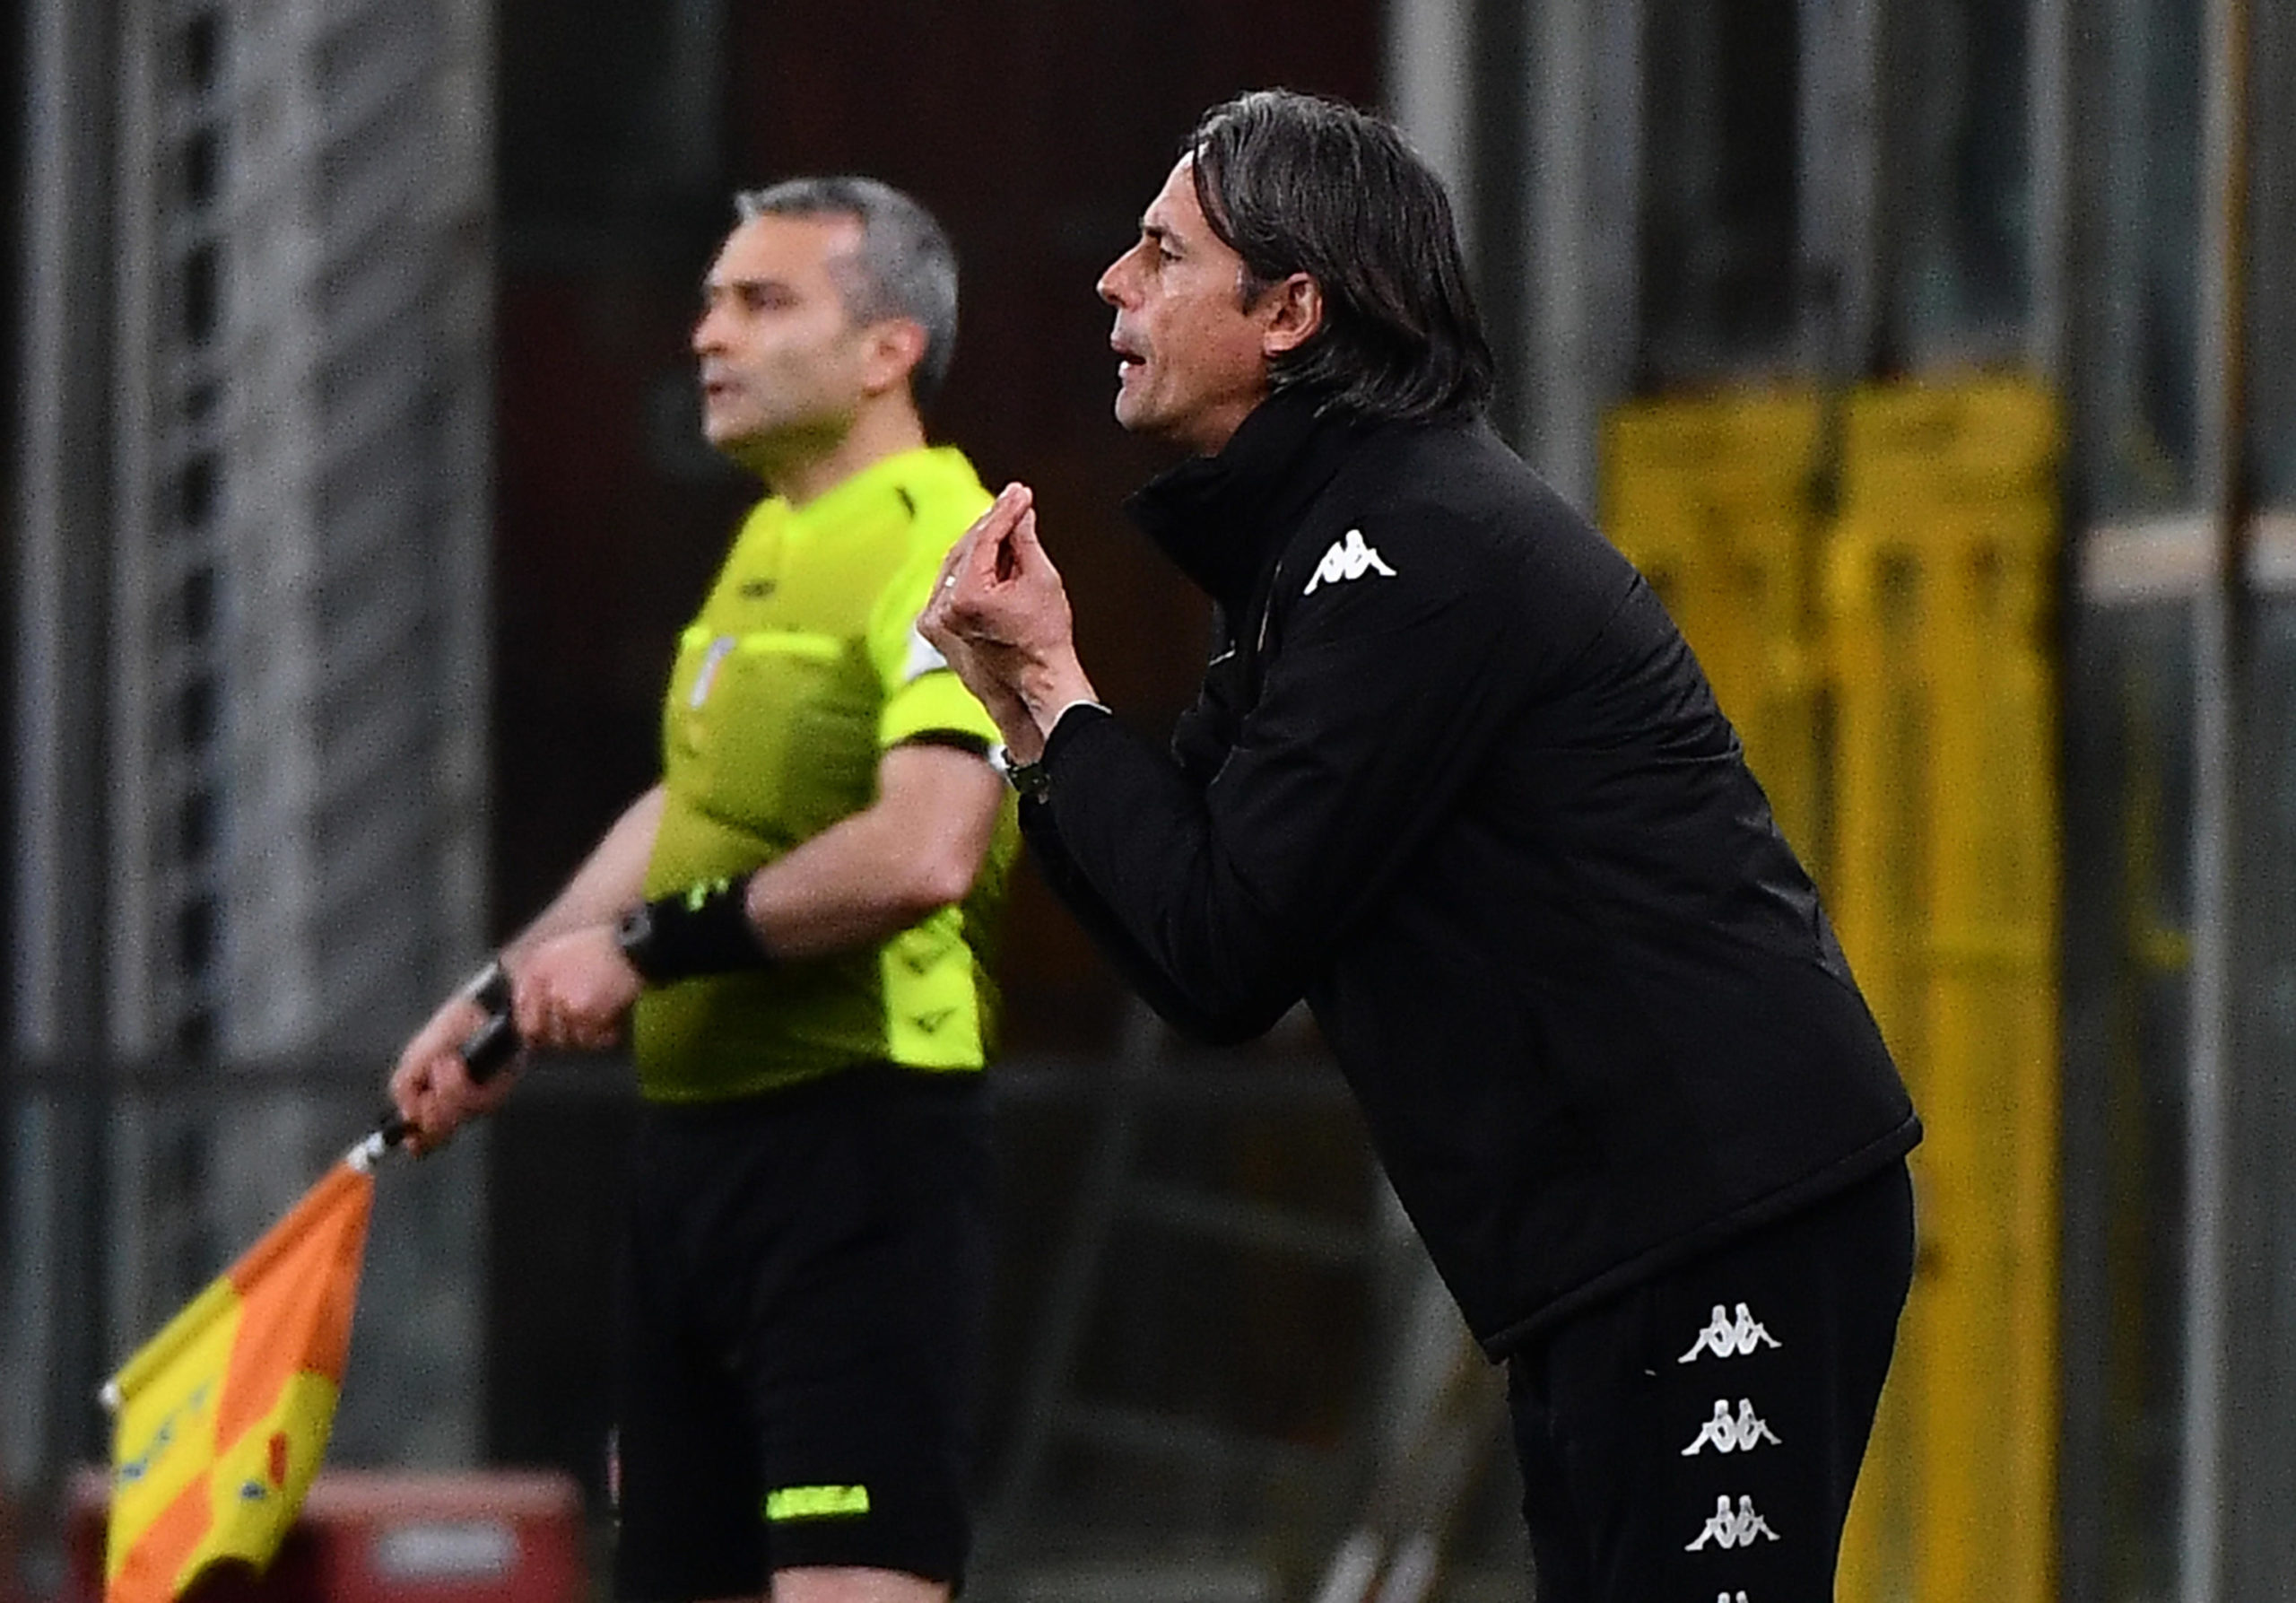 Benevento coach Pippo Inzaghi gestures from the sidelines